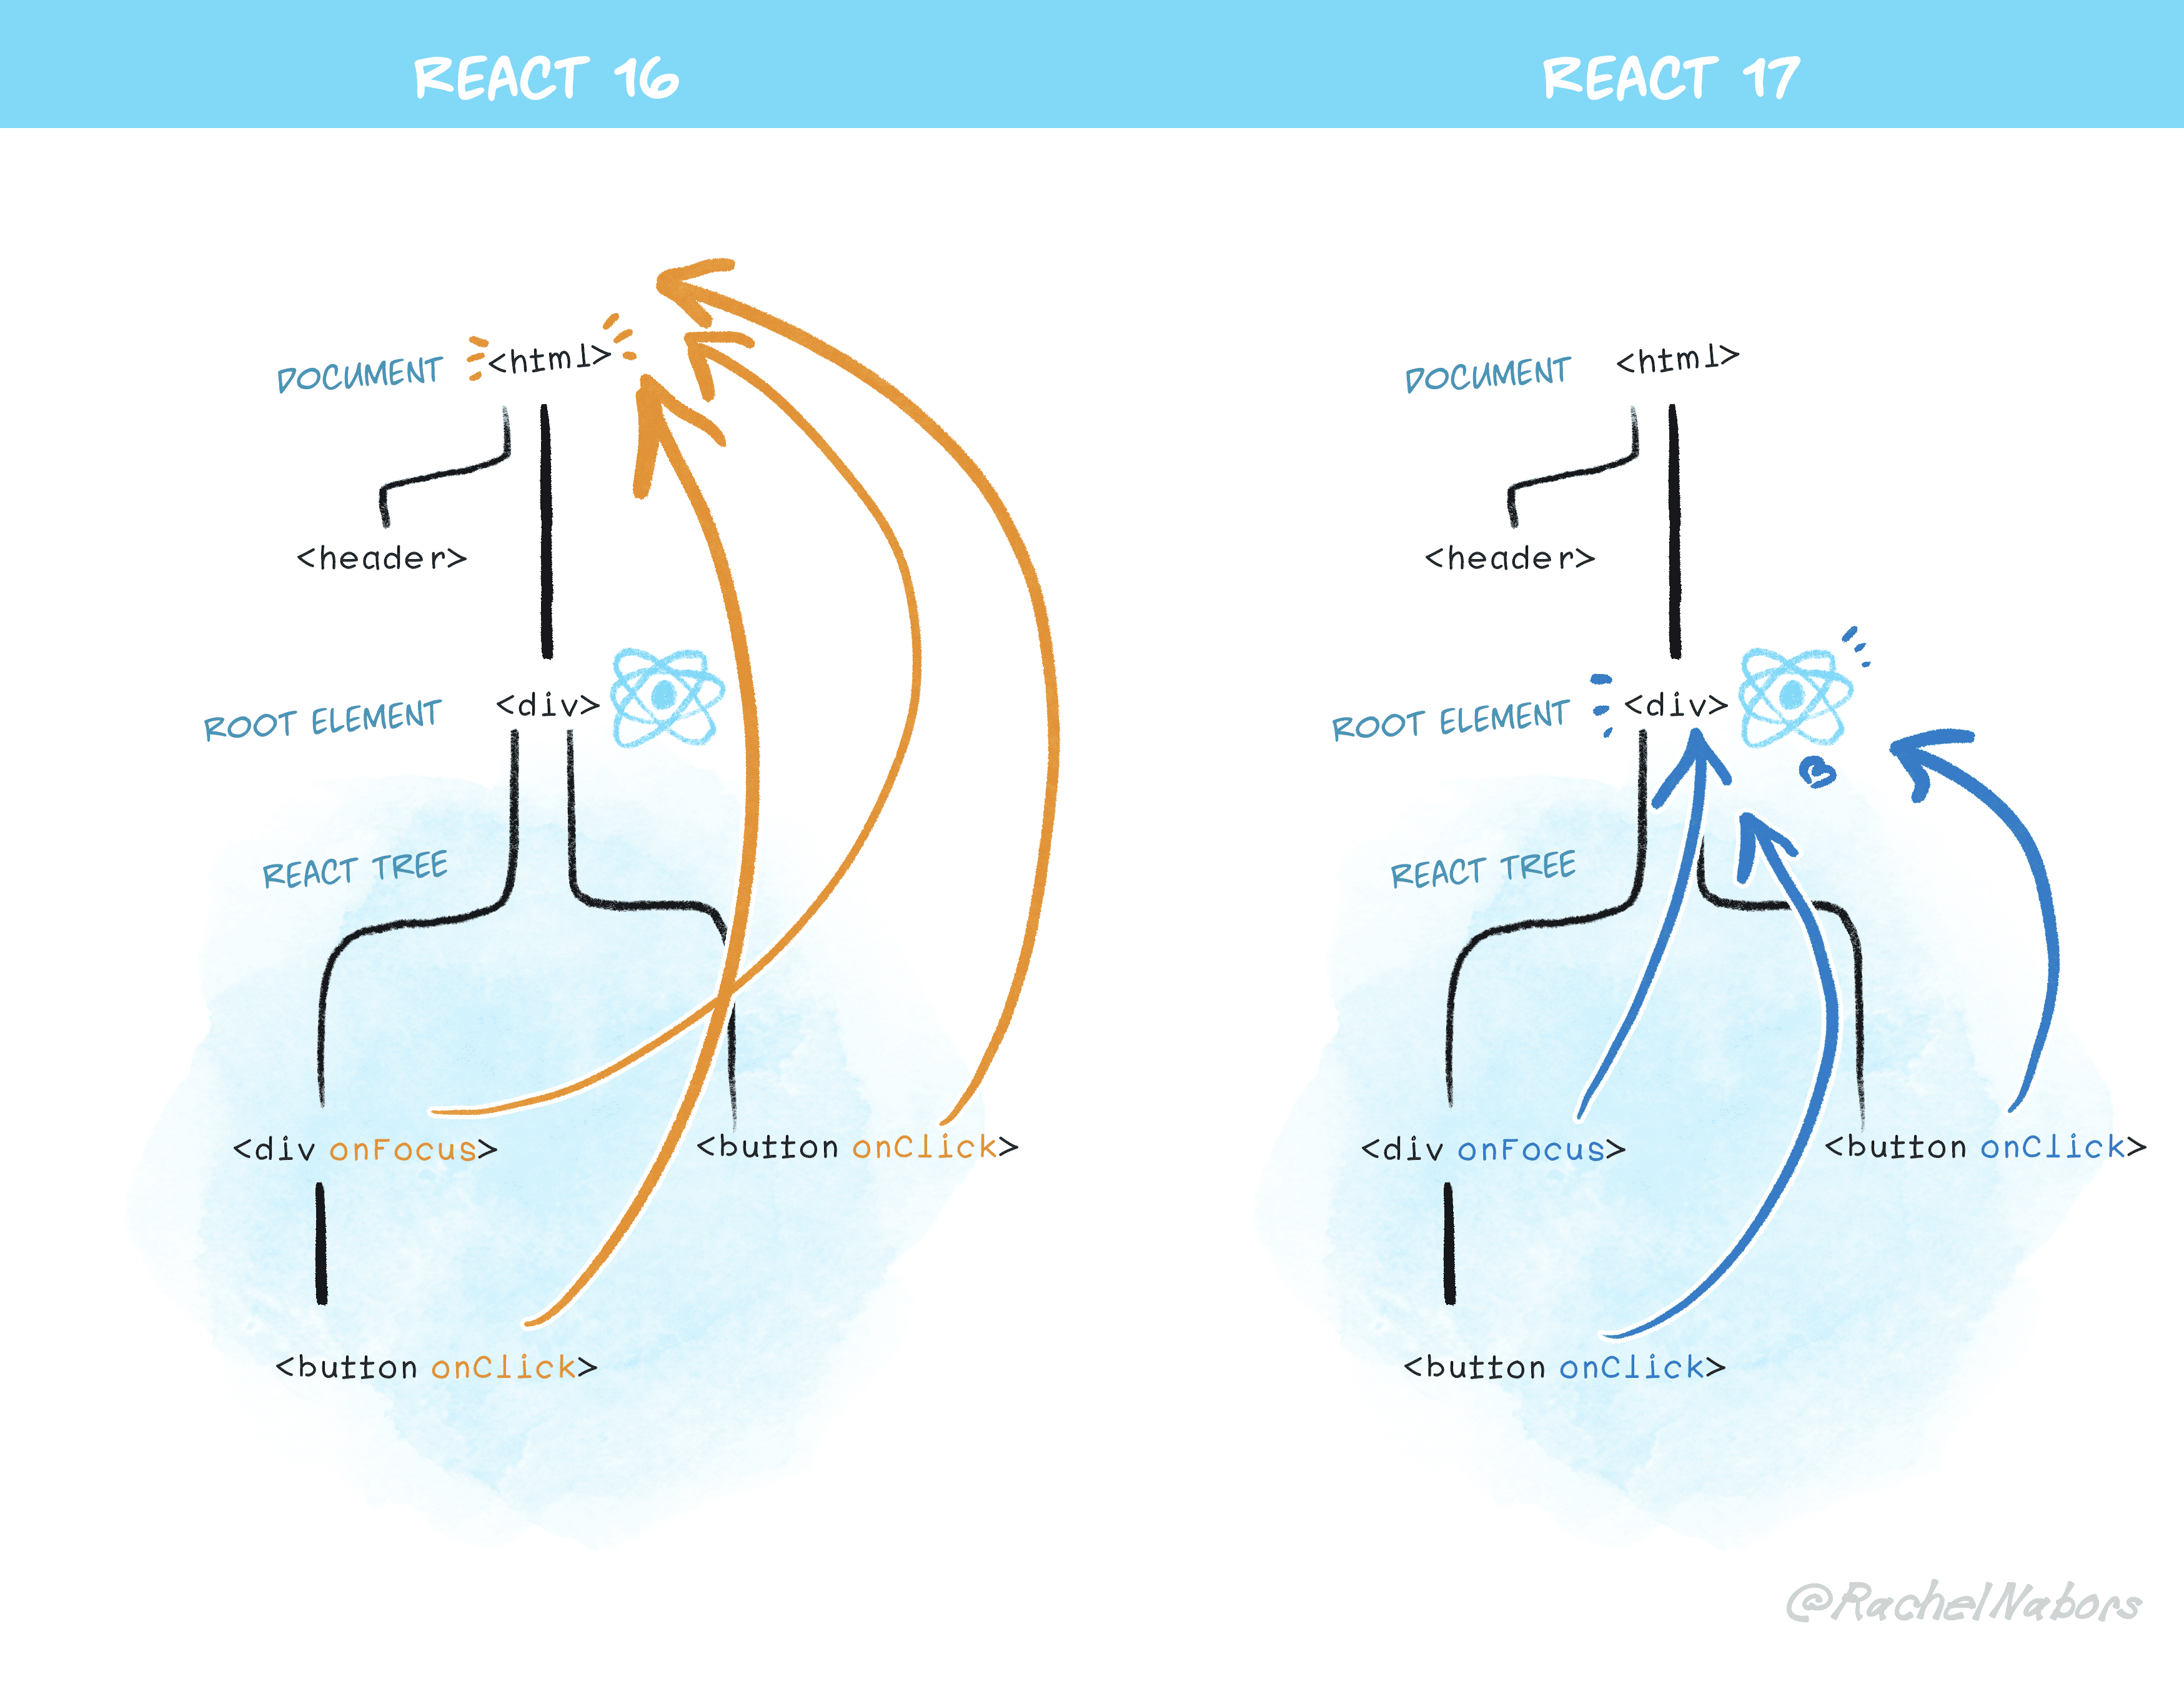 An image for React delegation between React 16 and React 17